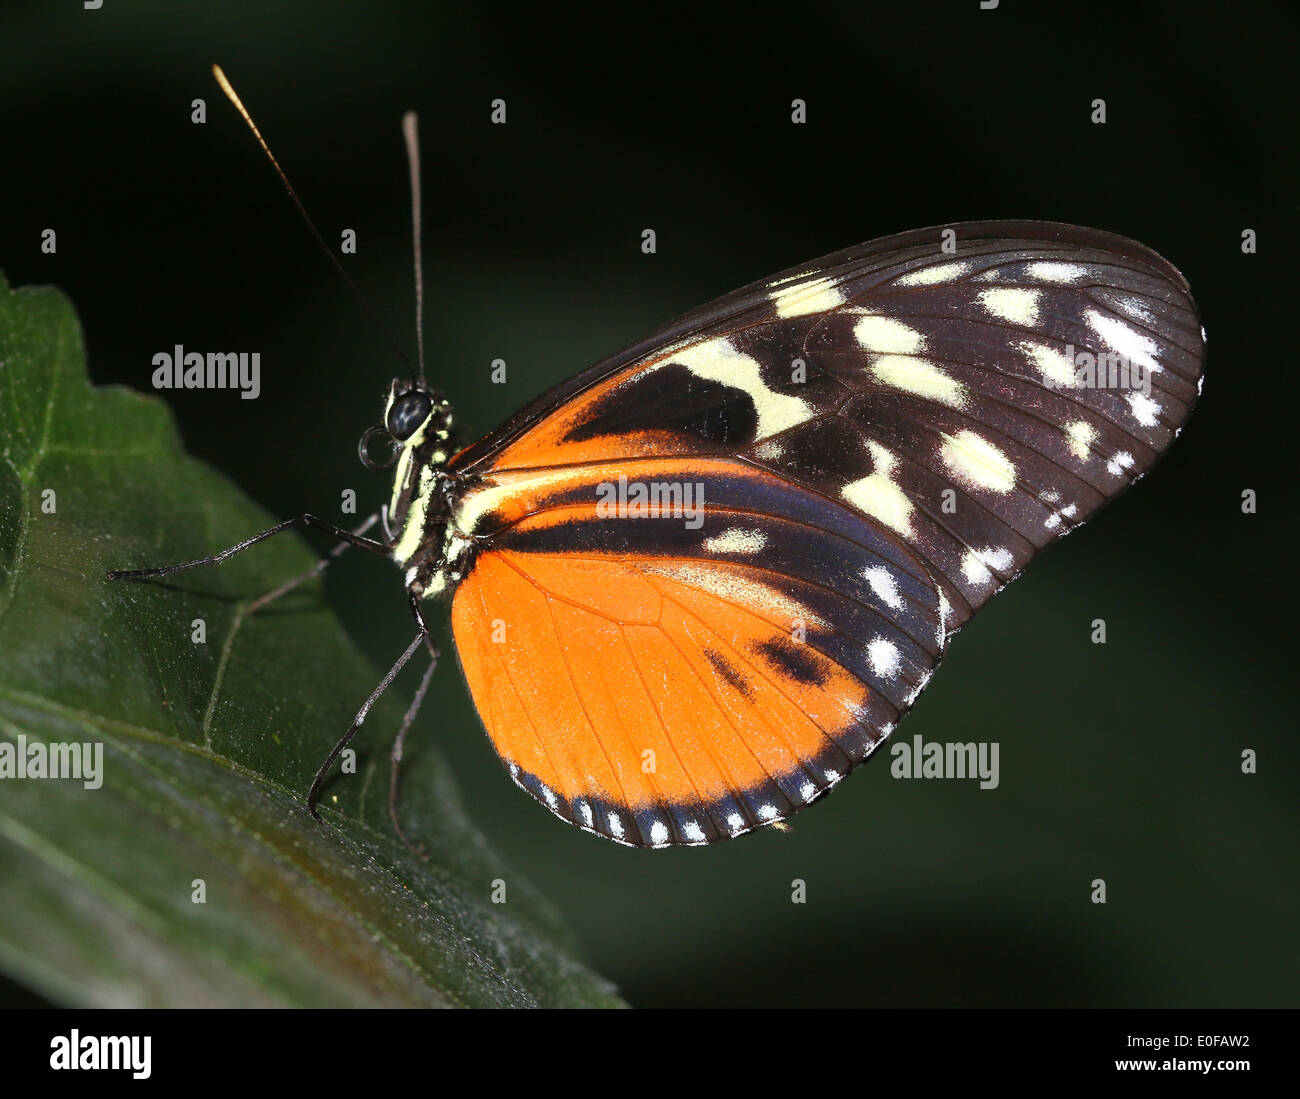 Tiger Longwing, Hecale Longwing or Golden Longwing butterfly (Heliconius Hecale) in profile Stock Photo